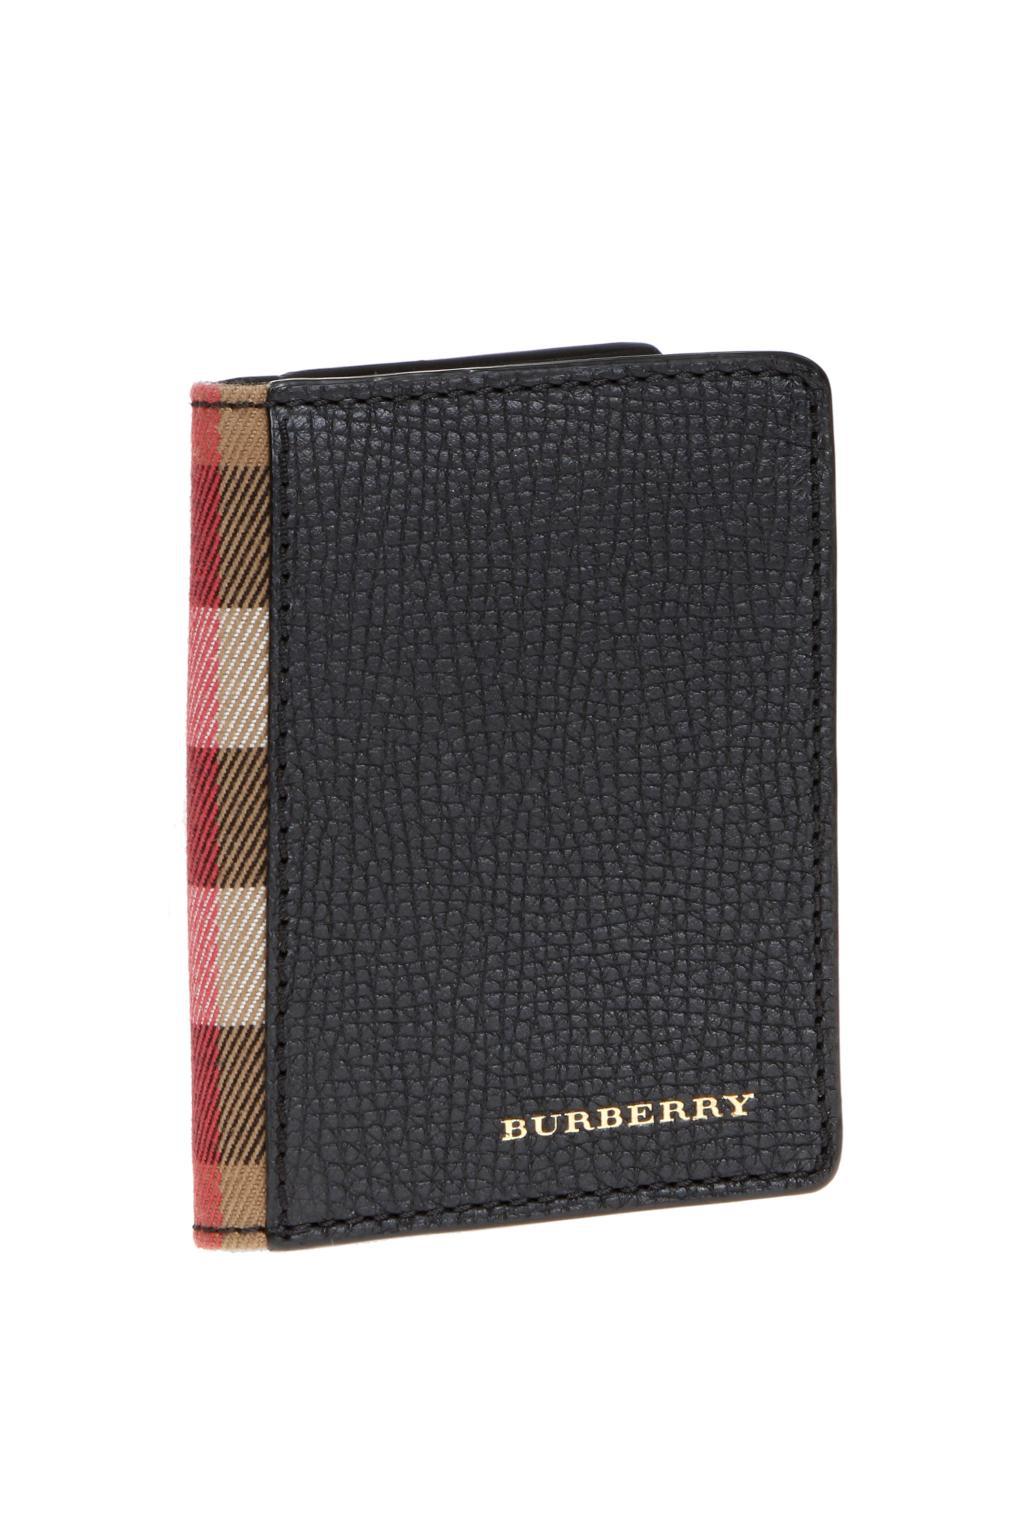 Burberry Cotton Folding Card Case in Black for Men - Lyst